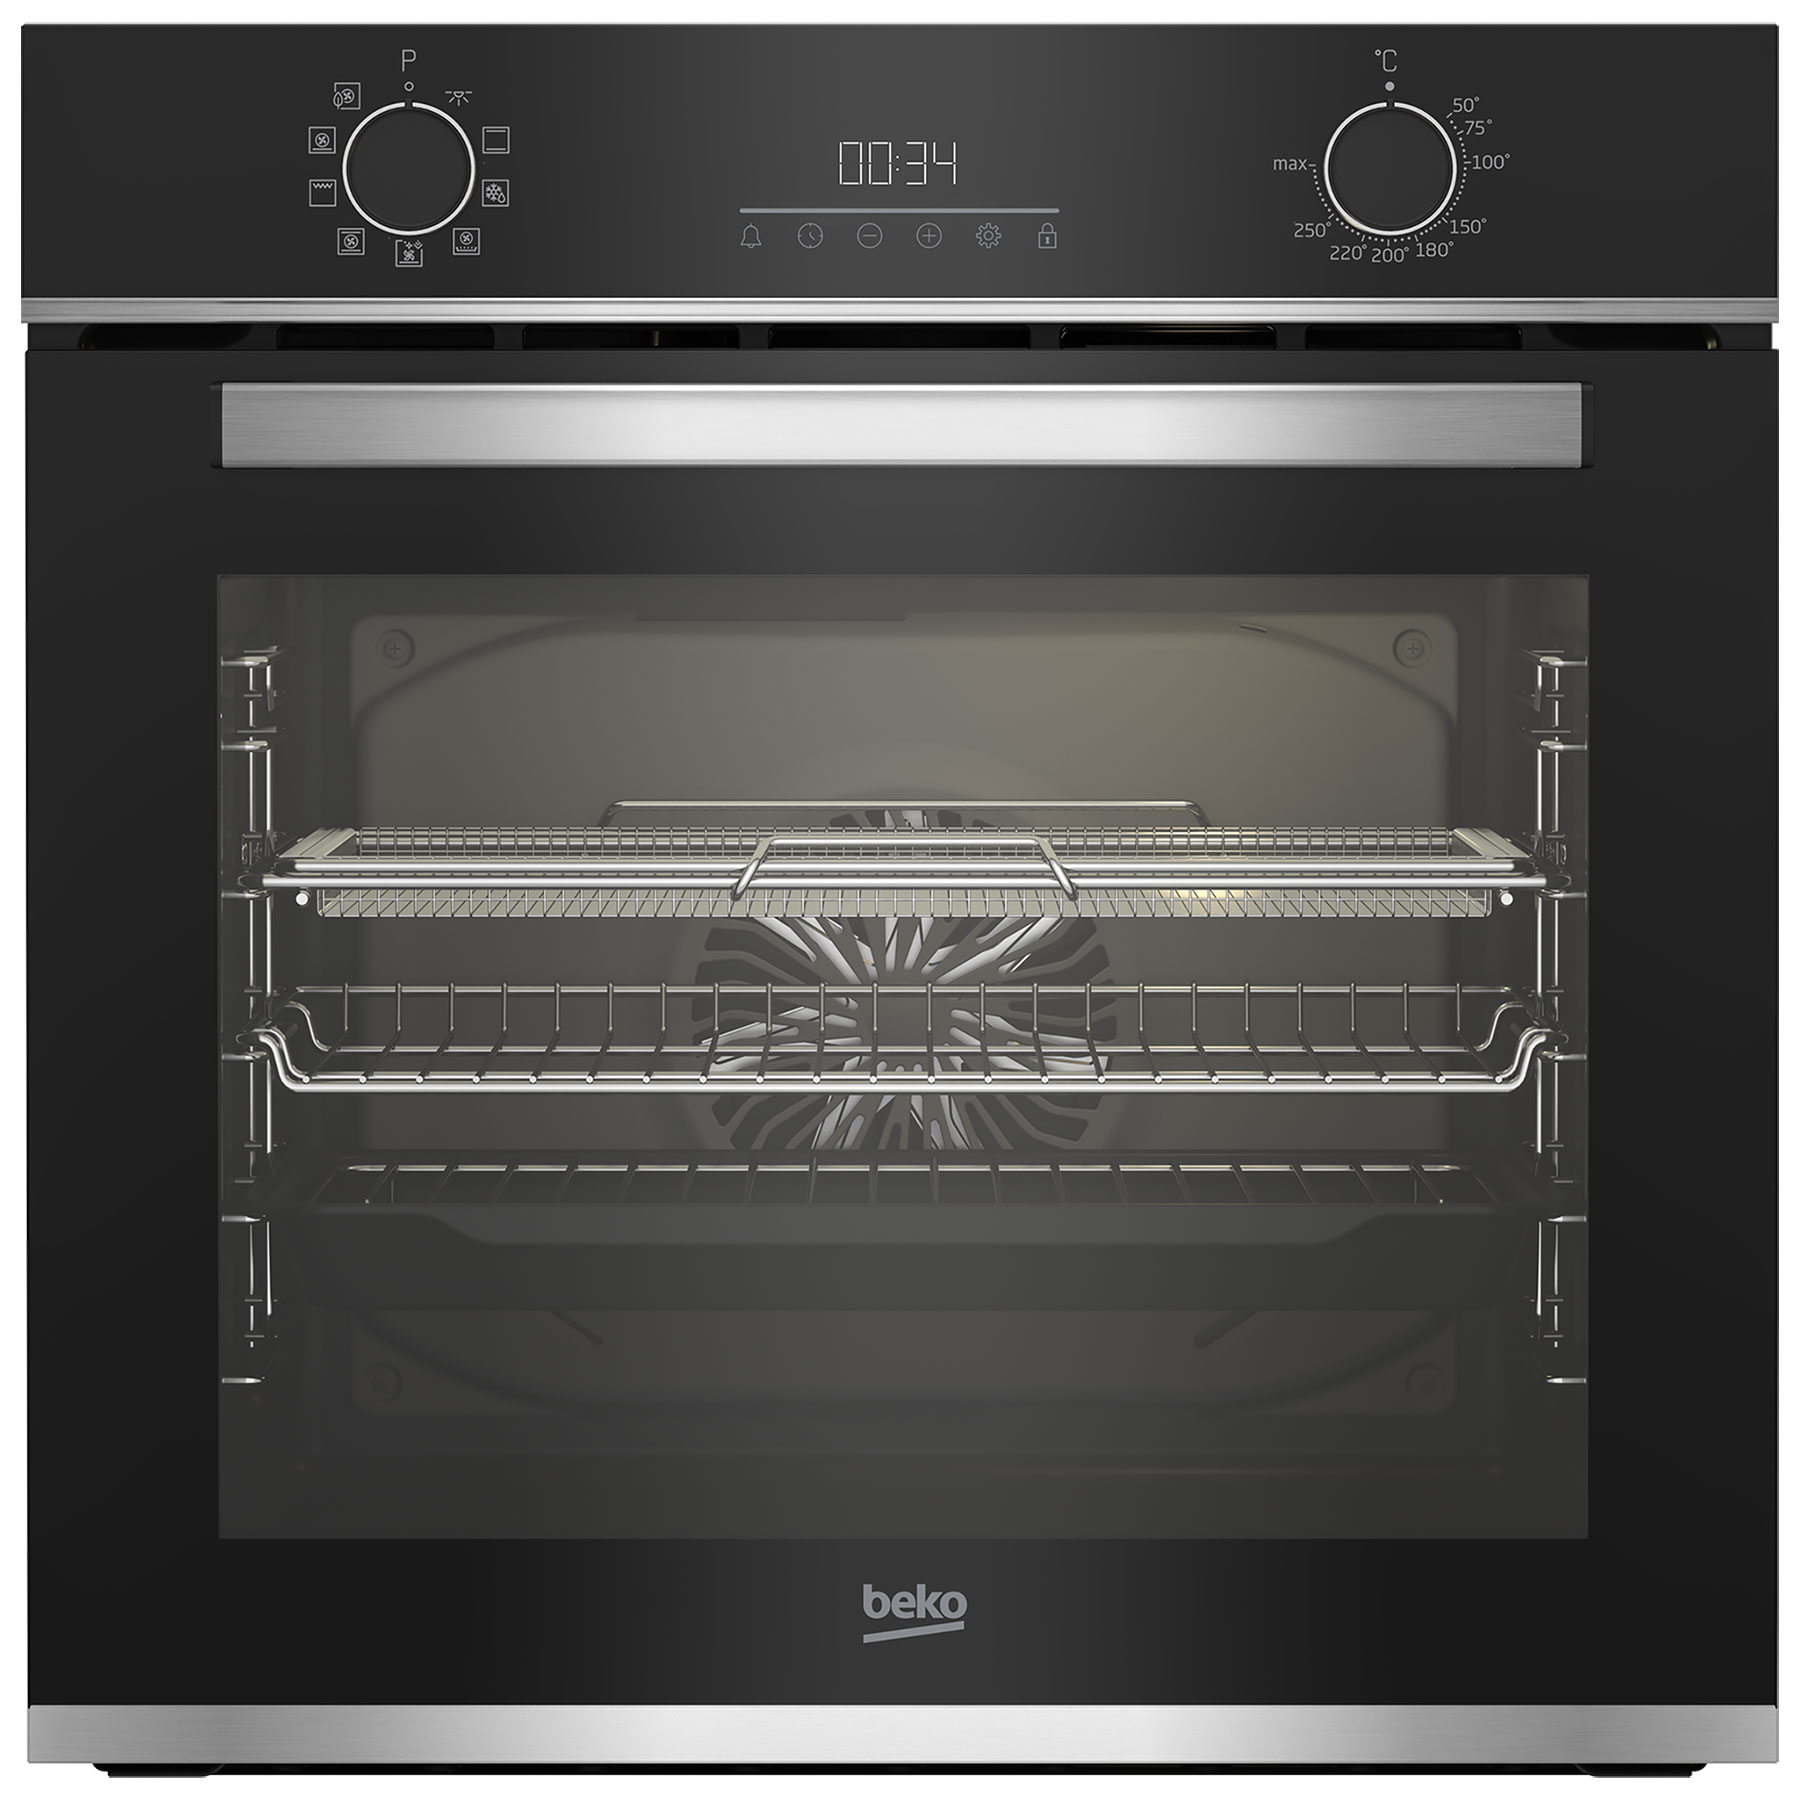 Beko CIMYA91B Built In Electric Single Oven in Blk St St 72L A Rated